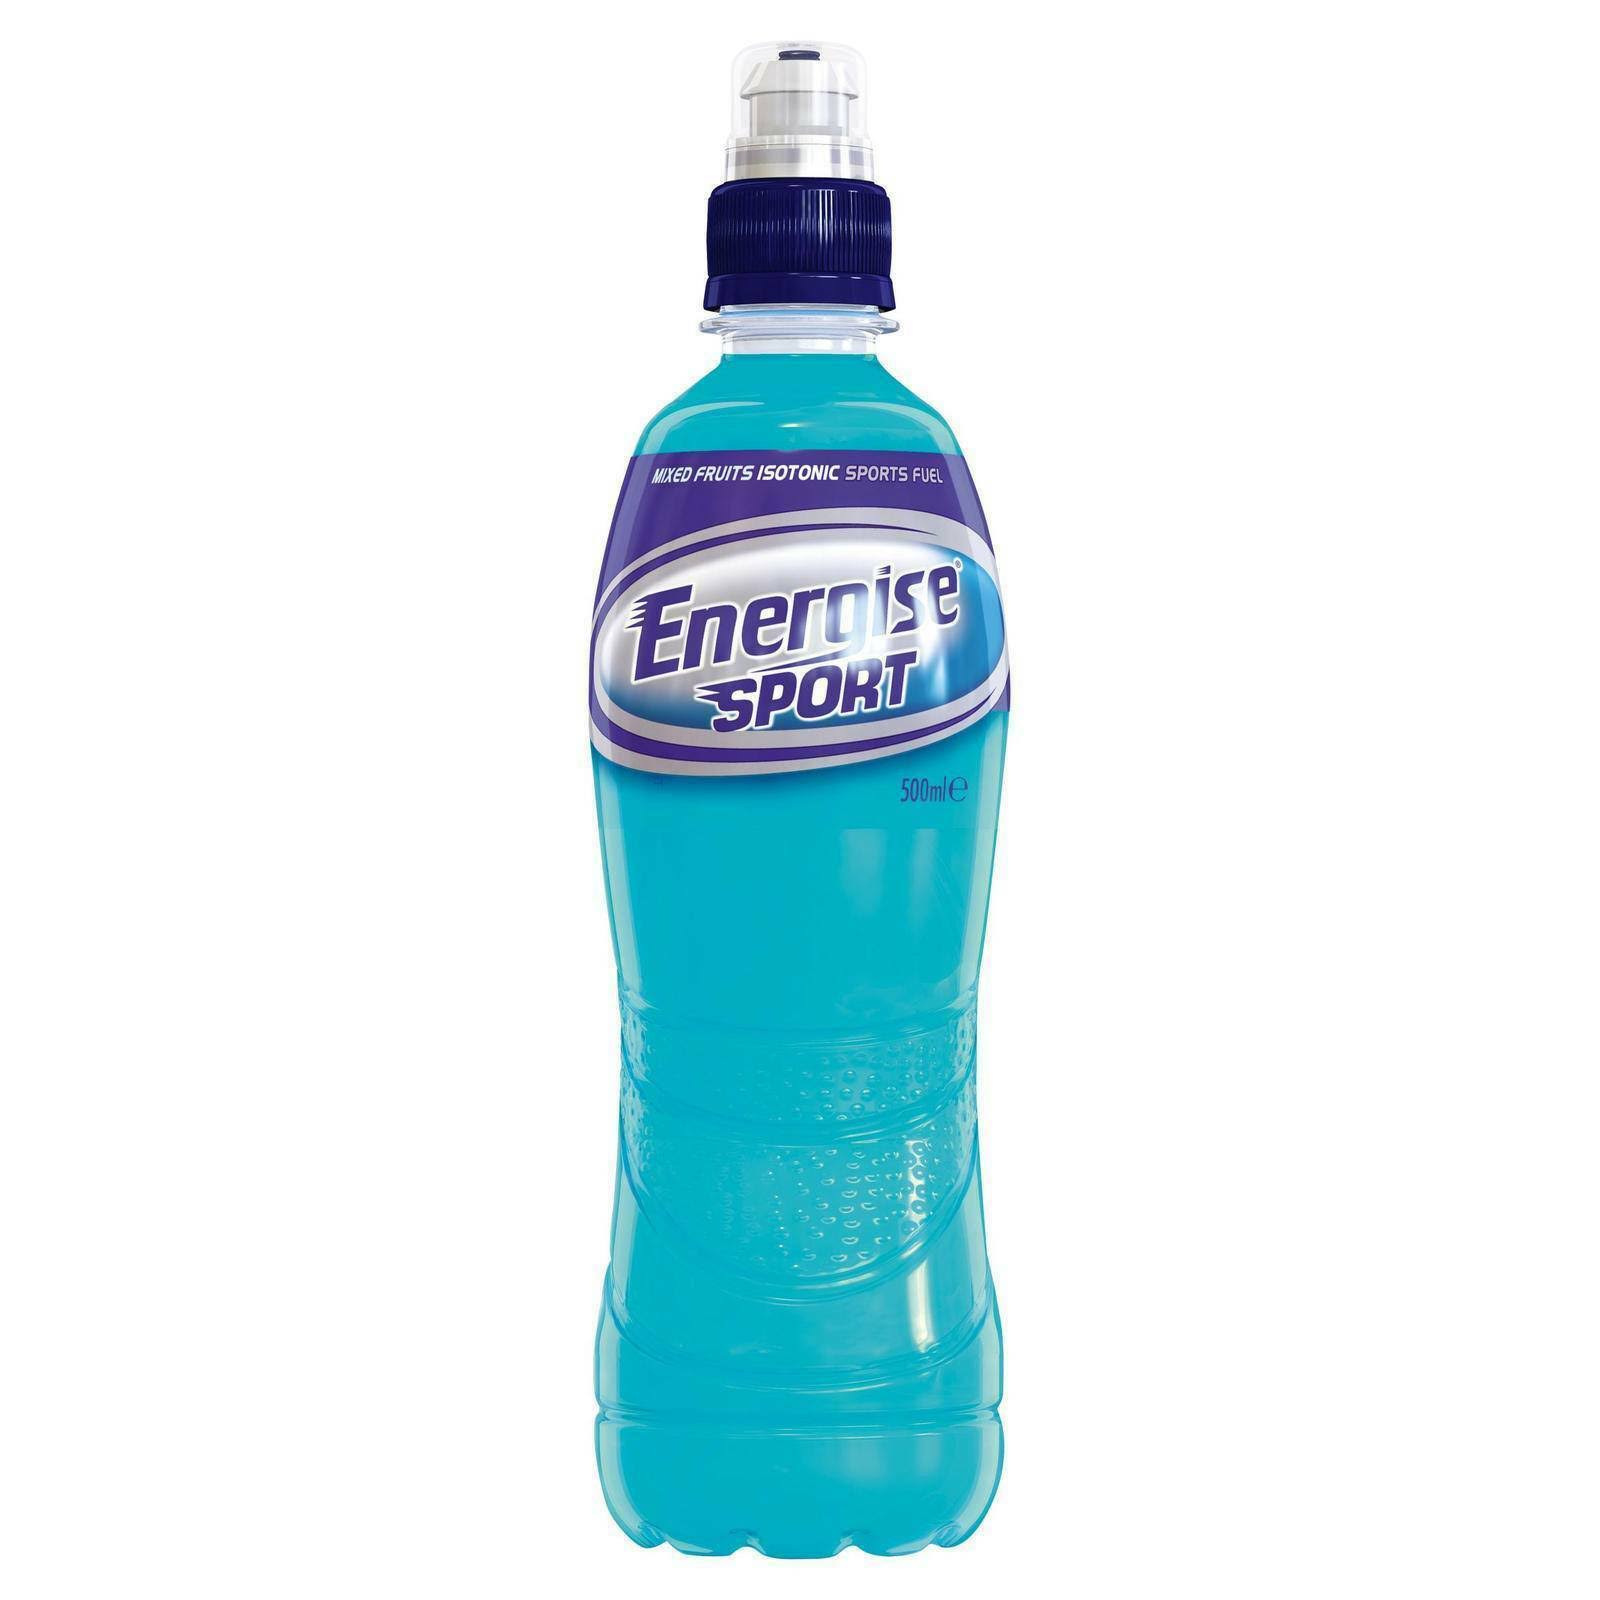 Energise Sport Mixed Fruits Isotonic Sports Fuel - 500ml